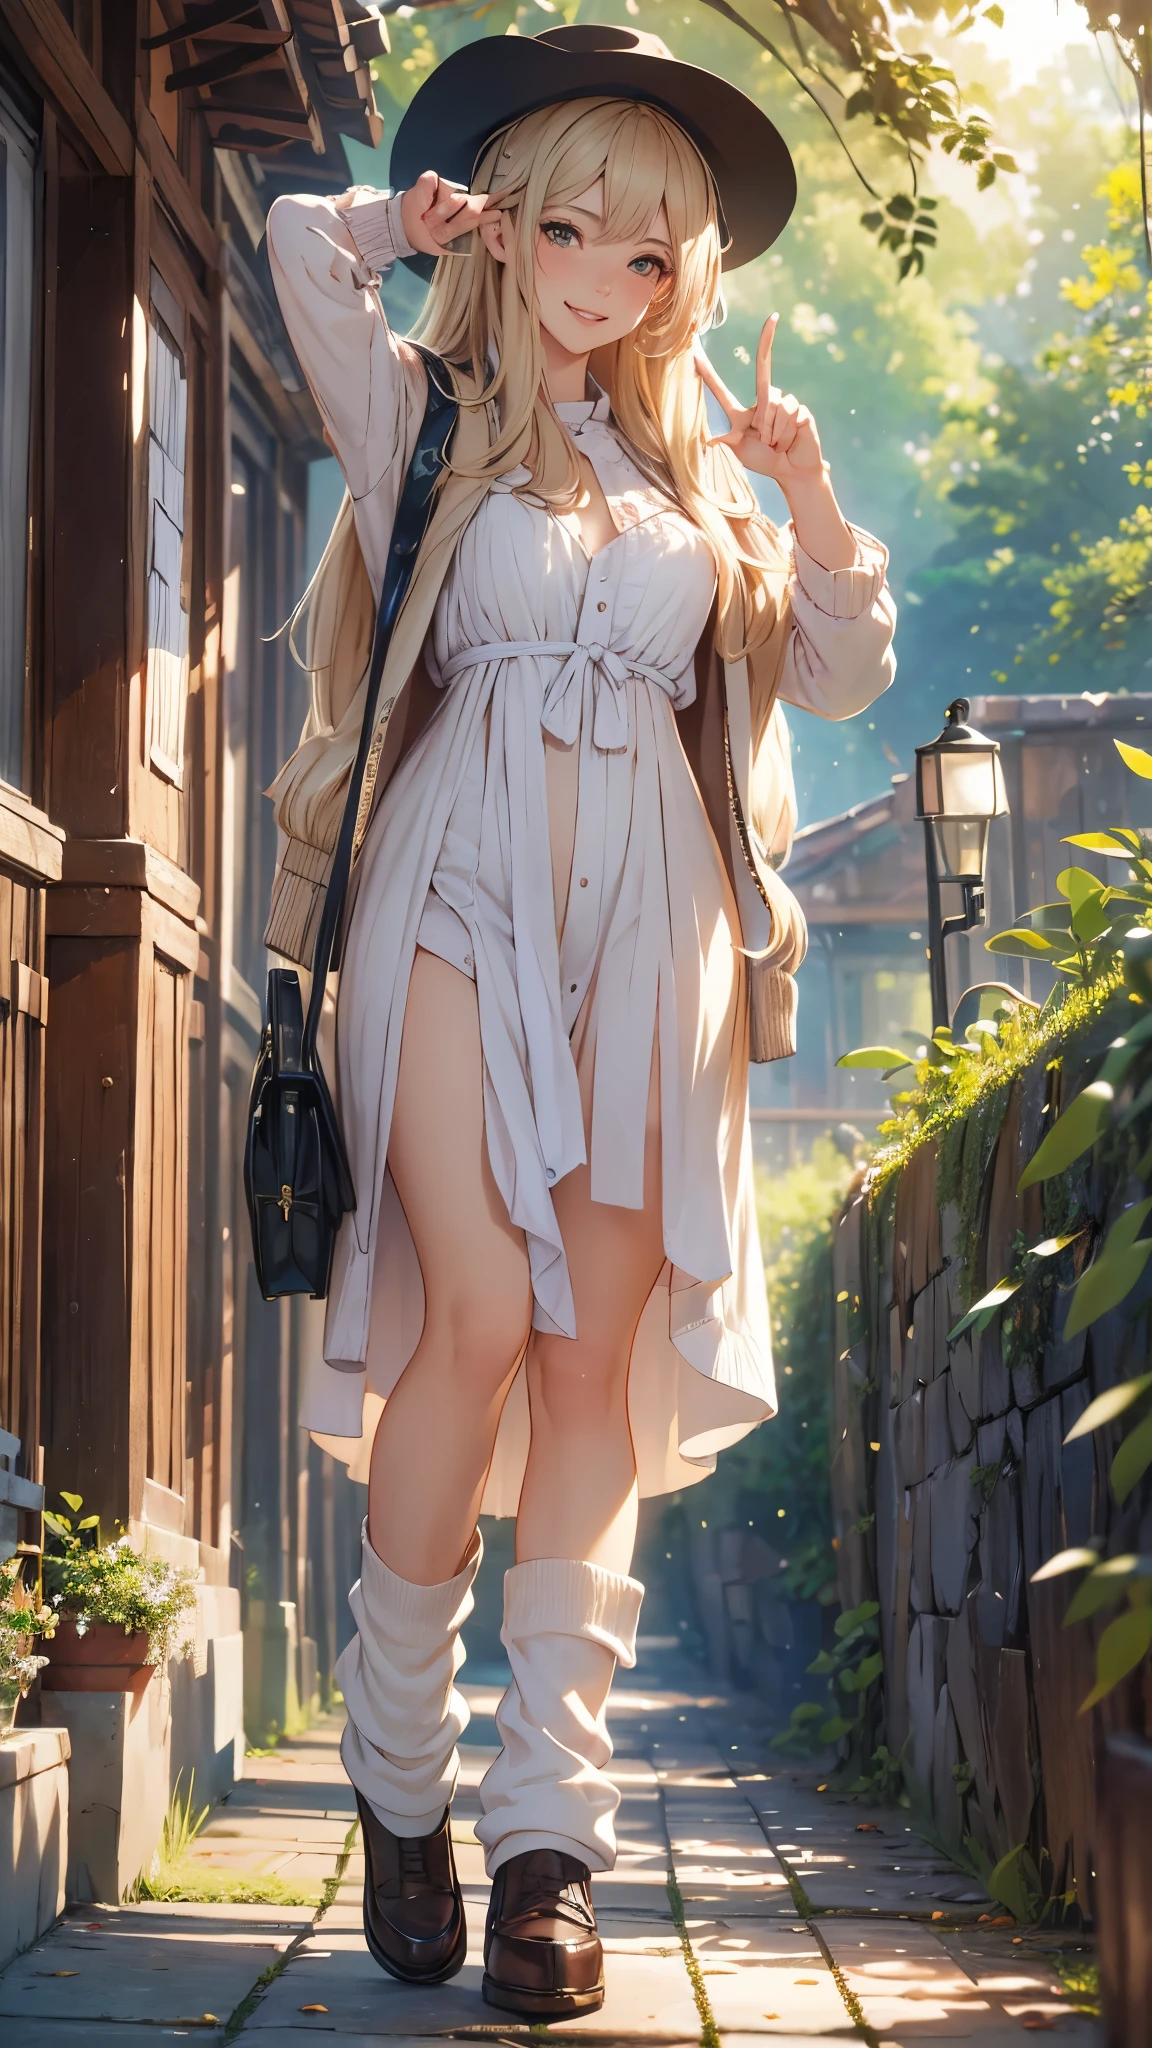 A beautiful young woman, 18 years old, grin,grin,((peace sign,peace sign)),wearing a long white maxi dress, socks,short boots,with long flowing blonde hair, grinning with a slightly mischievous expression, standing in a serene outdoor setting, sunlight filtering through the trees, (best quality,4k,8k,highres,masterpiece:1.2),ultra-detailed,(realistic,photorealistic,photo-realistic:1.37),detailed facial features, beautiful eyes, nose, and lips, intricate fabric textures, natural lighting, cinematic composition, vibrant colors, fantasy,ethereal